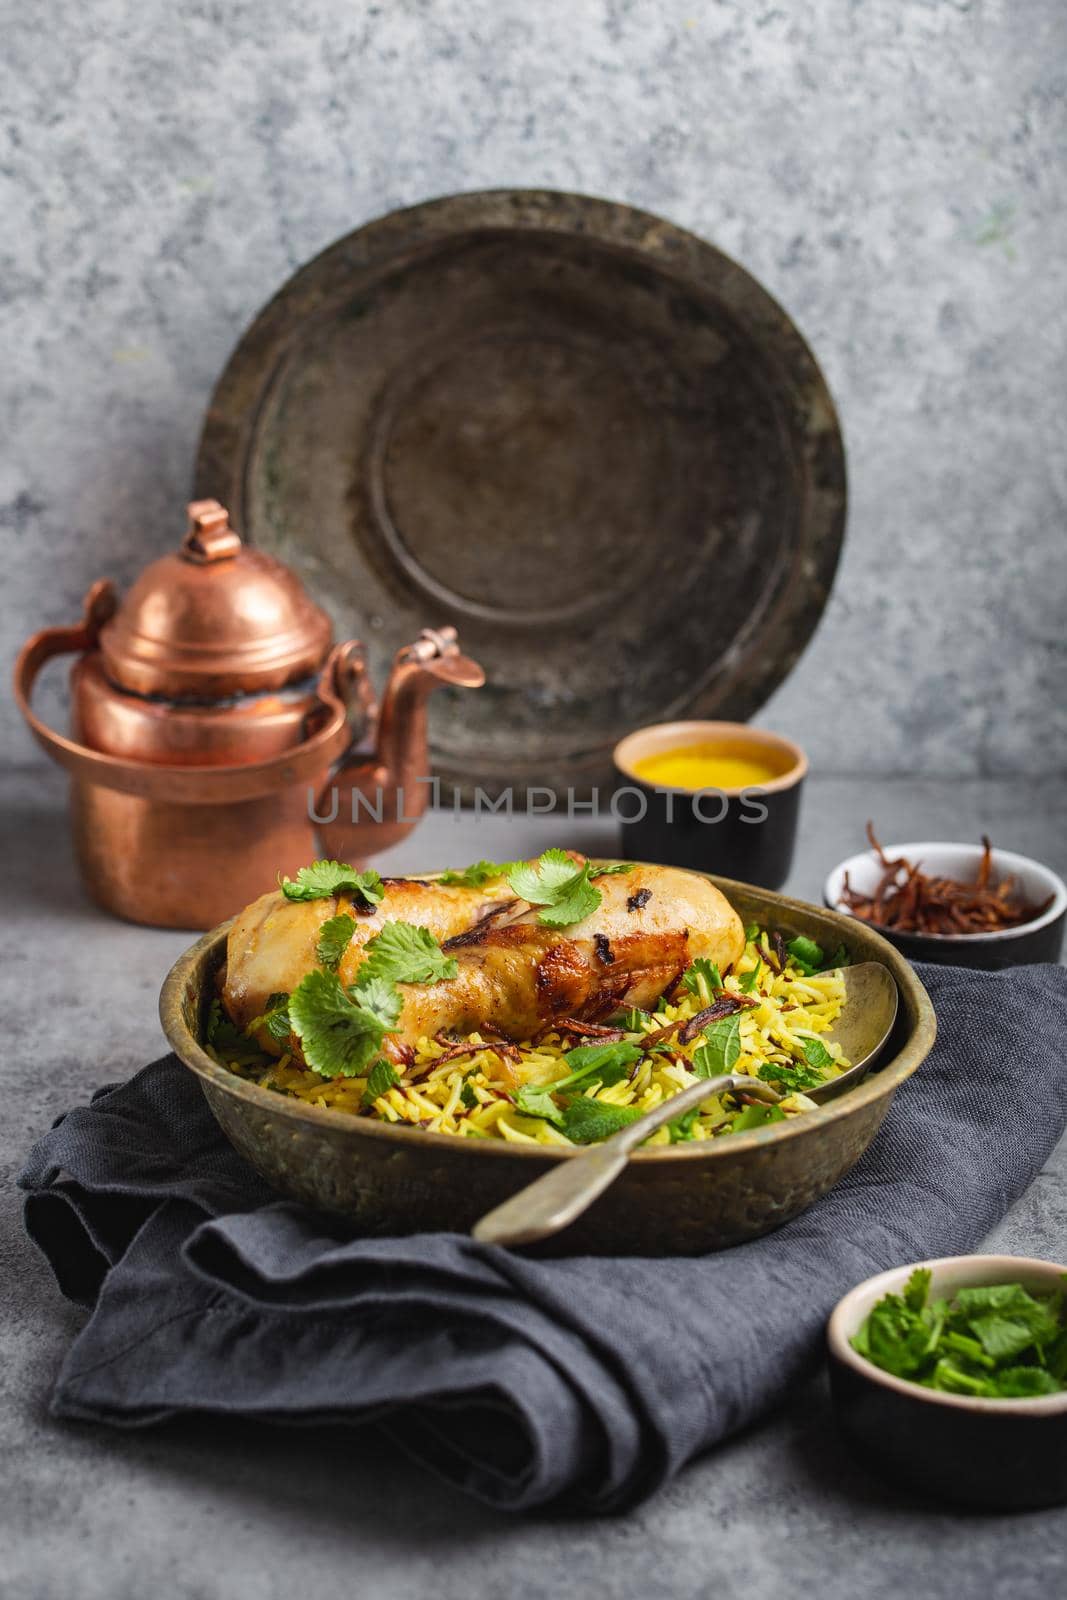 Biryani chicken, traditional dish of Indian cuisine, with basmati rice, fried onion, fresh cilantro in bowl on gray rustic stone background. Authentic Indian meal, close-up, selective focus